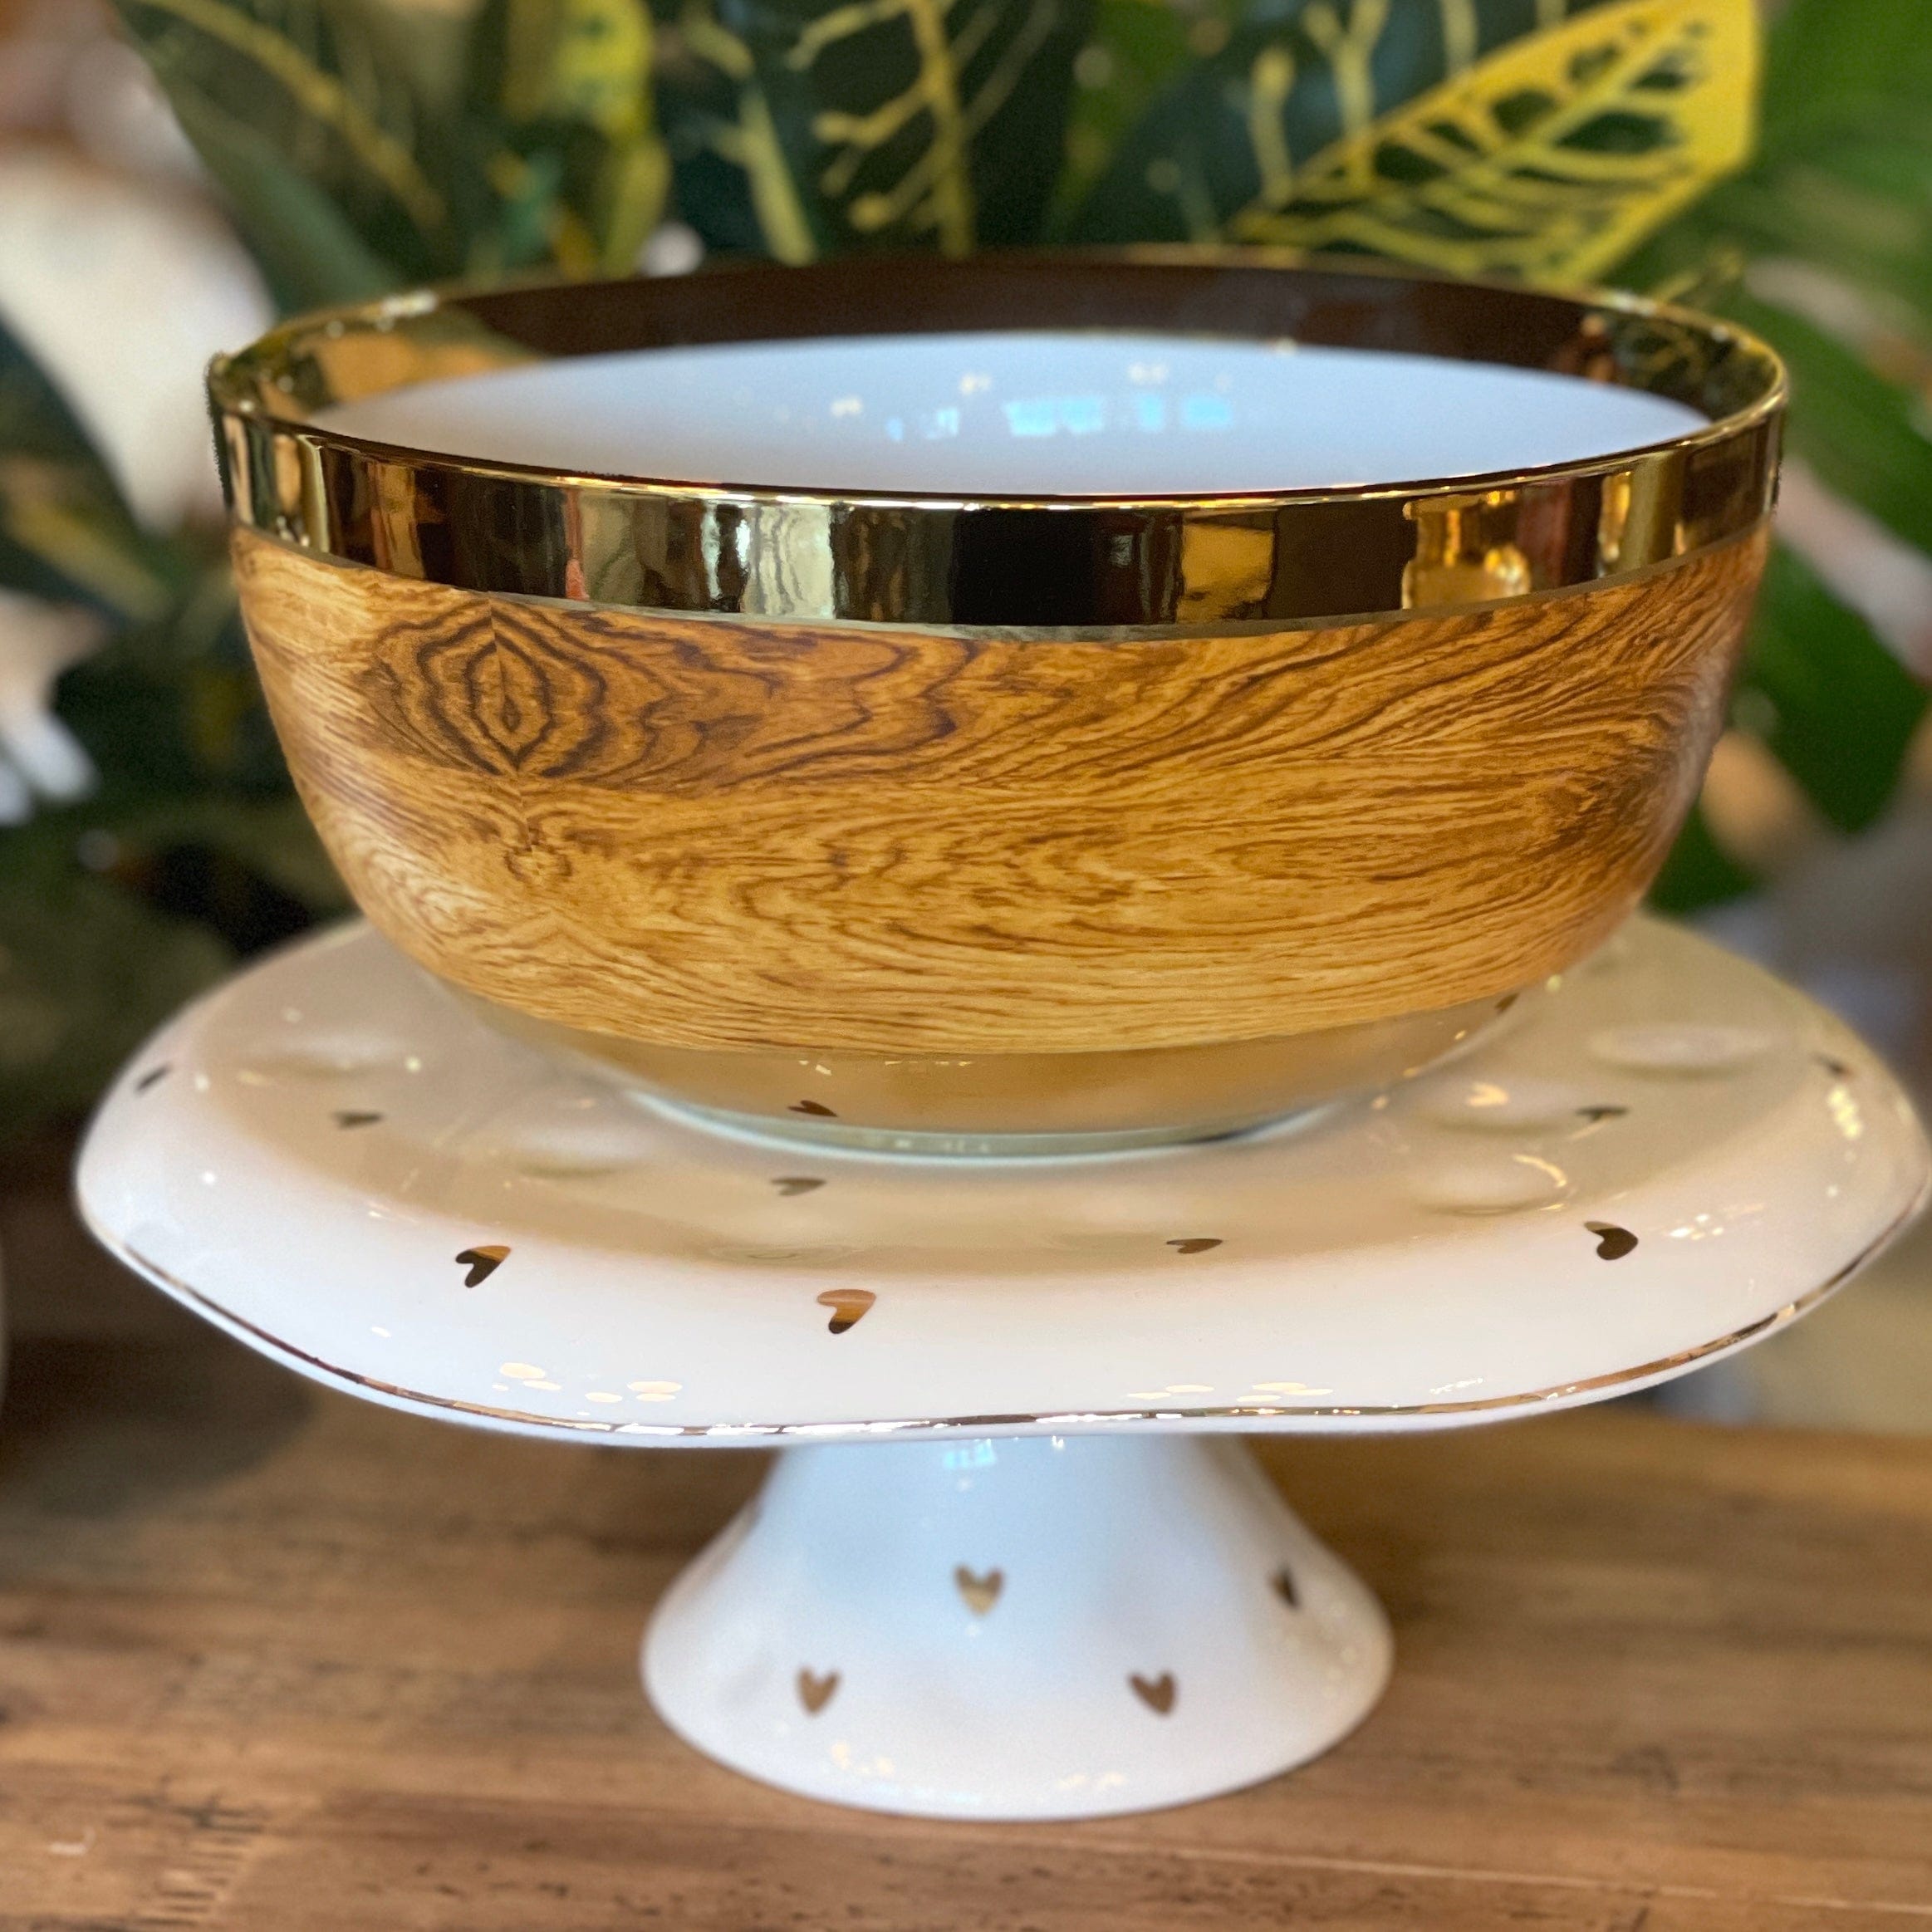 Gold Hearts Porcelain Cake Stand - PORCH